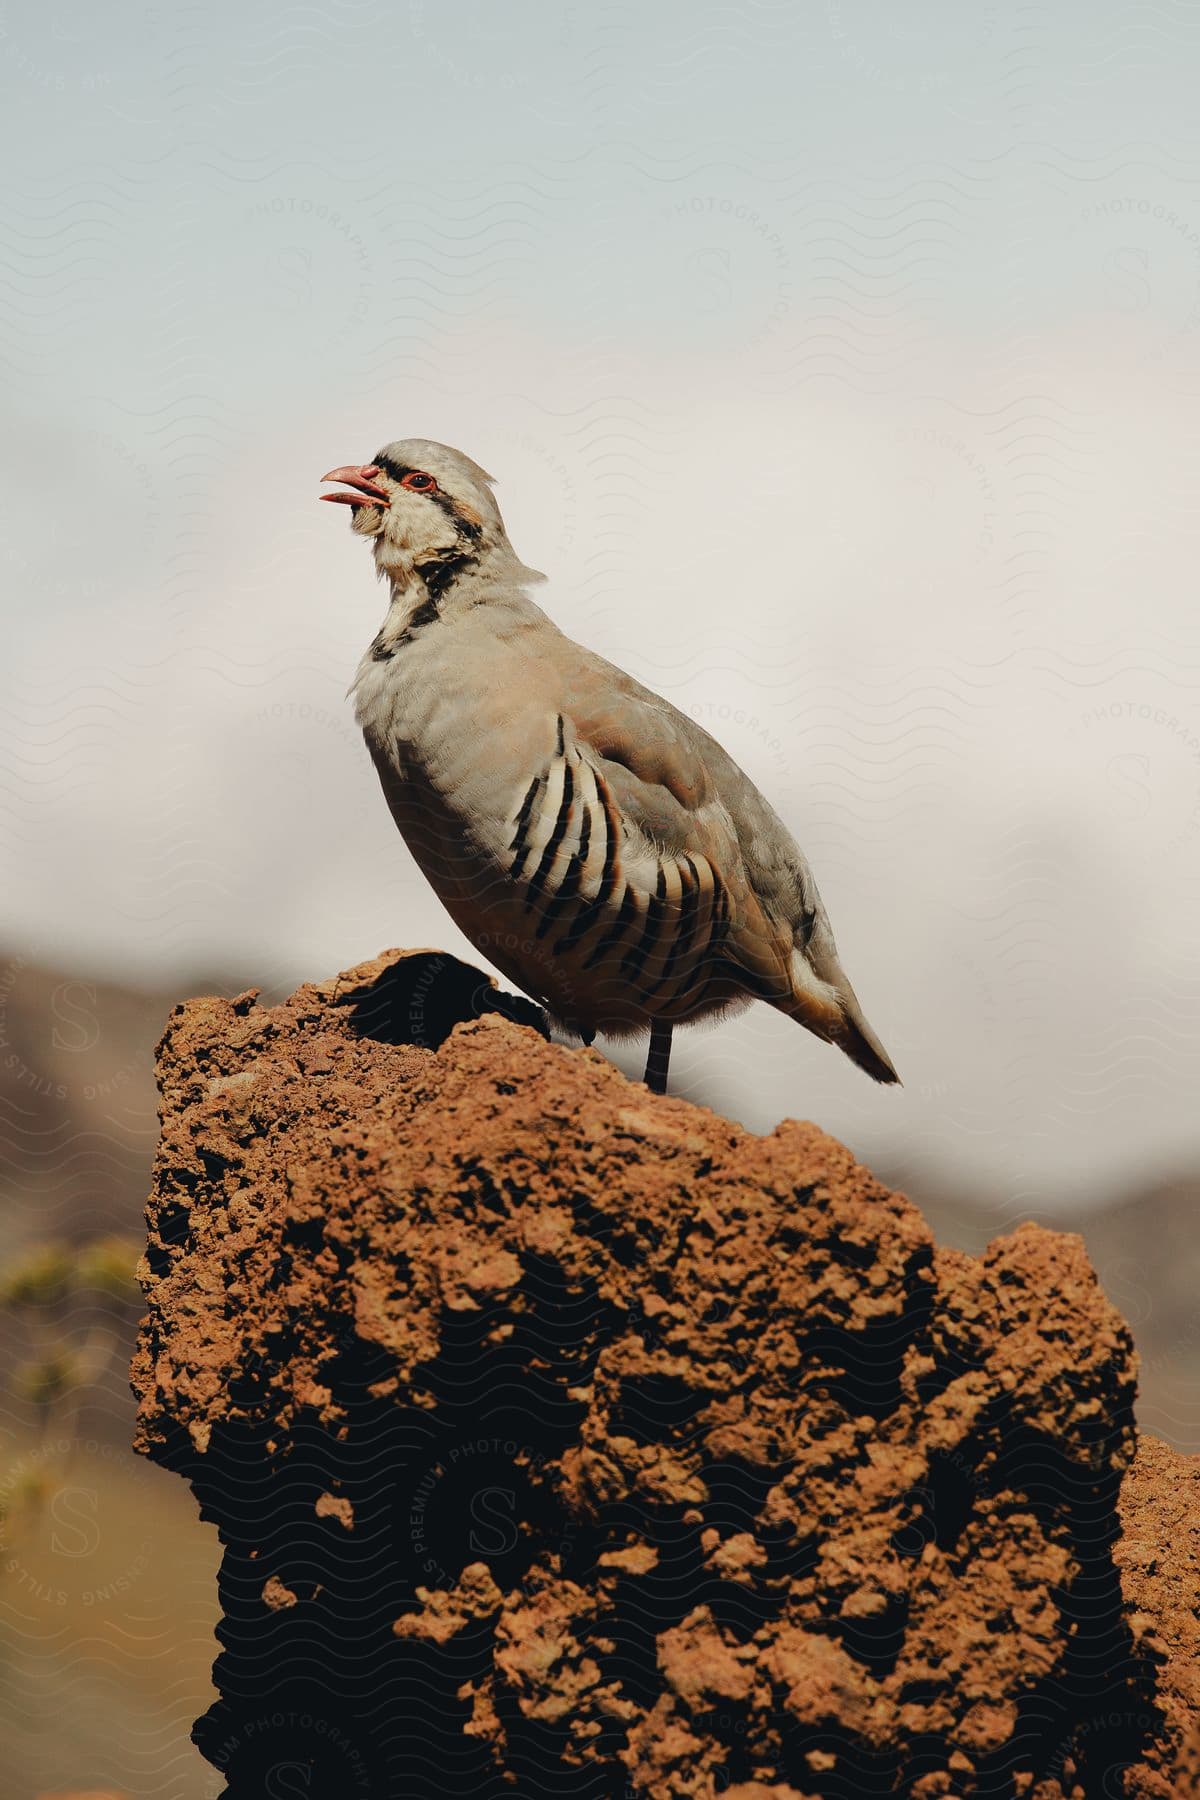 A bird with brown and ashcolored feathers standing on a brown rock with a vibrant red beak